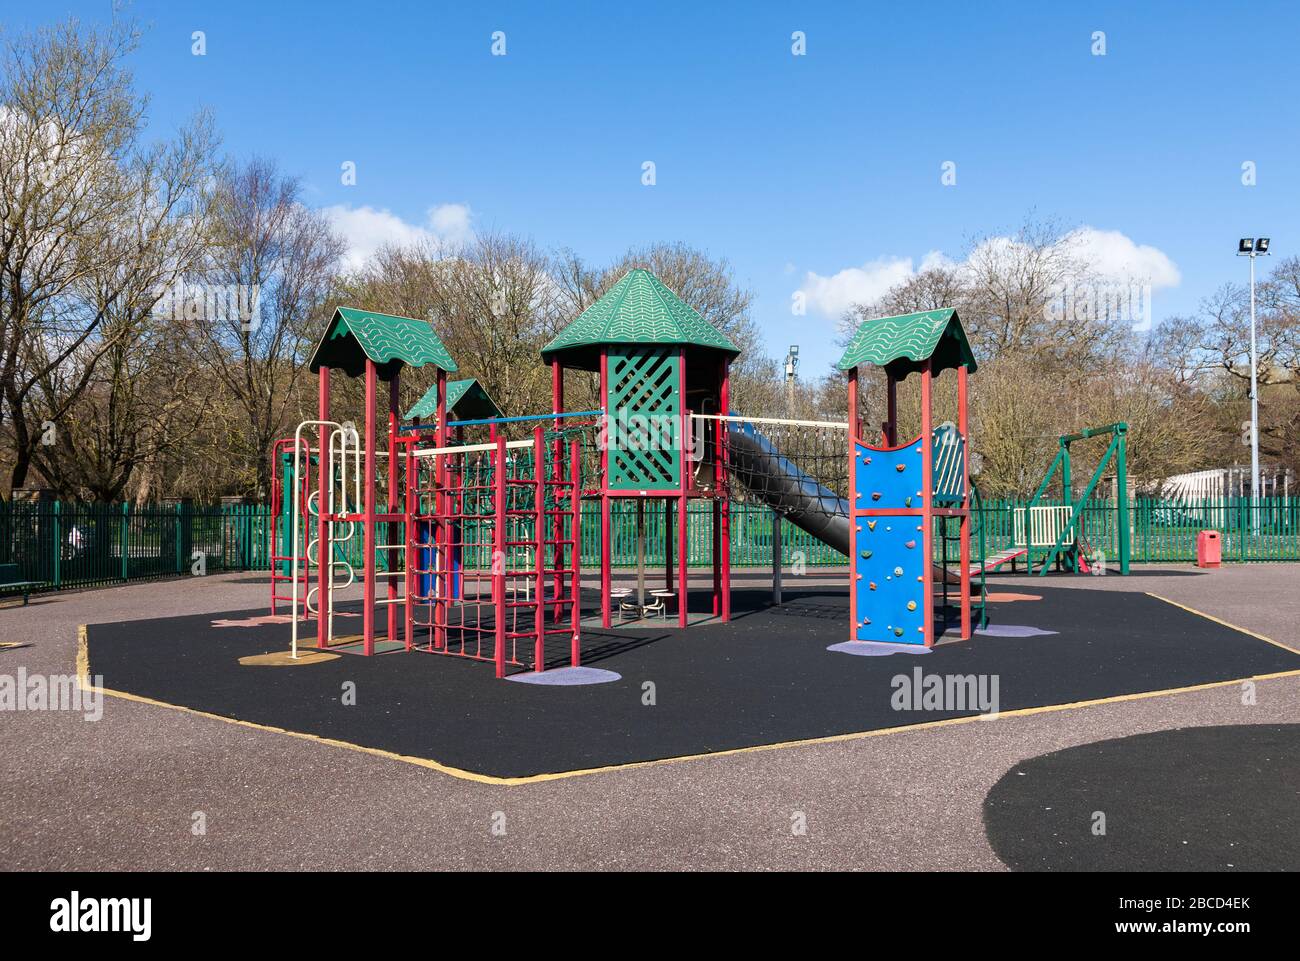 Carrigaline, Cork, Ireland. 04th April, 2020. Due to the Covid-19 emergency and in the interest of  safety all public playgrounds are now closed. Picture shows the public playground in Carrigaline, Co. Cork. Ireland. - Credit; David Creedon / Alamy Live News Stock Photo